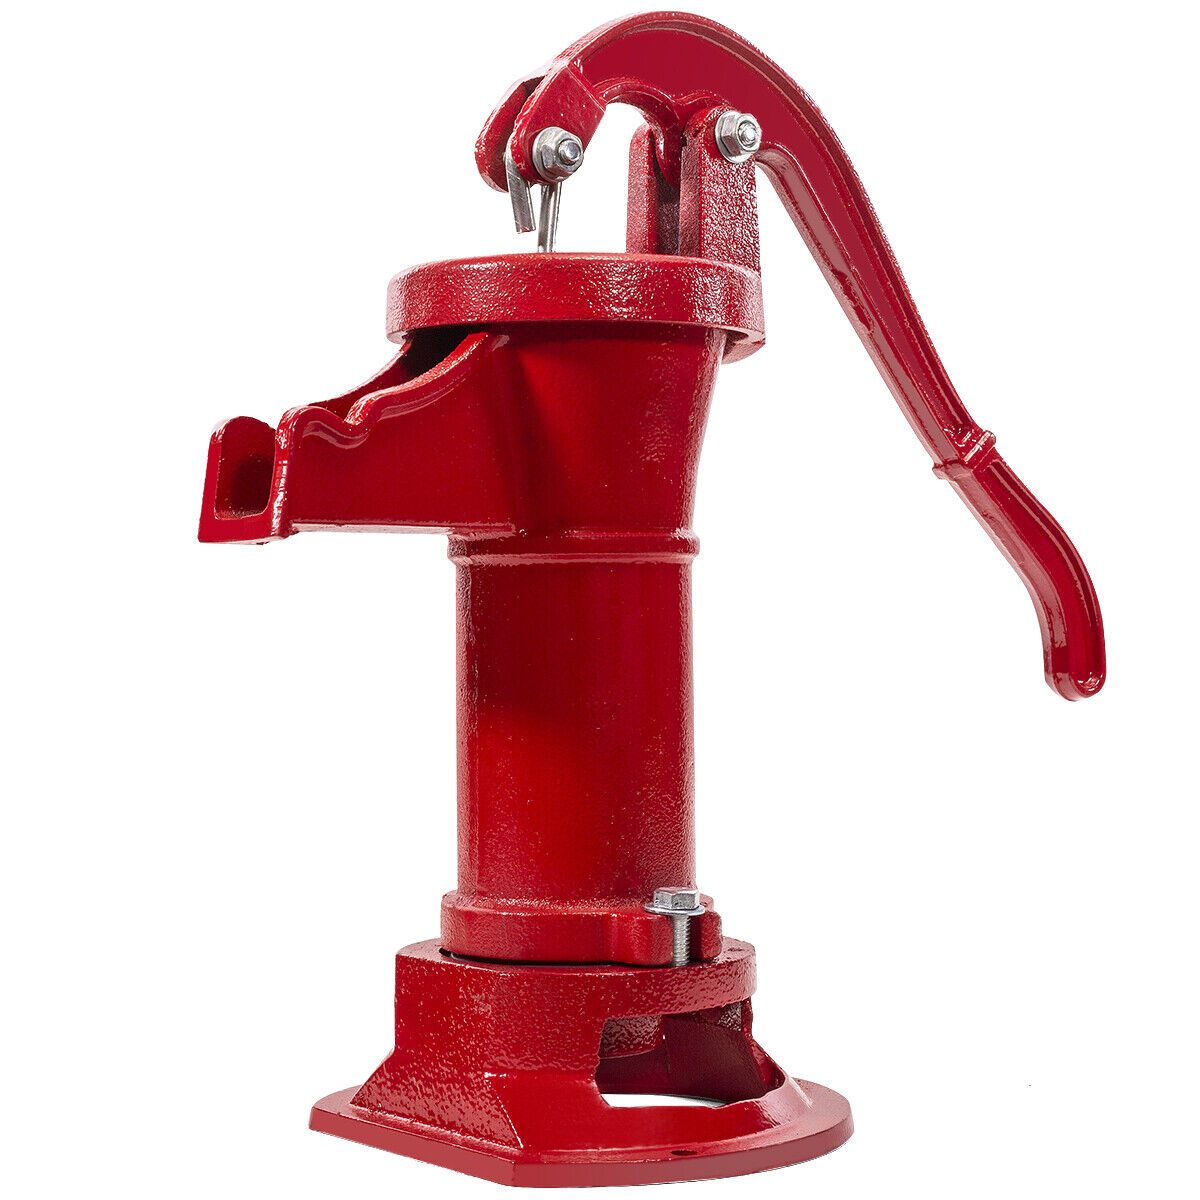 XtremepowerUS Antique Pitcher Hand Pump Red Operated 25\' Outdoor Patio Water